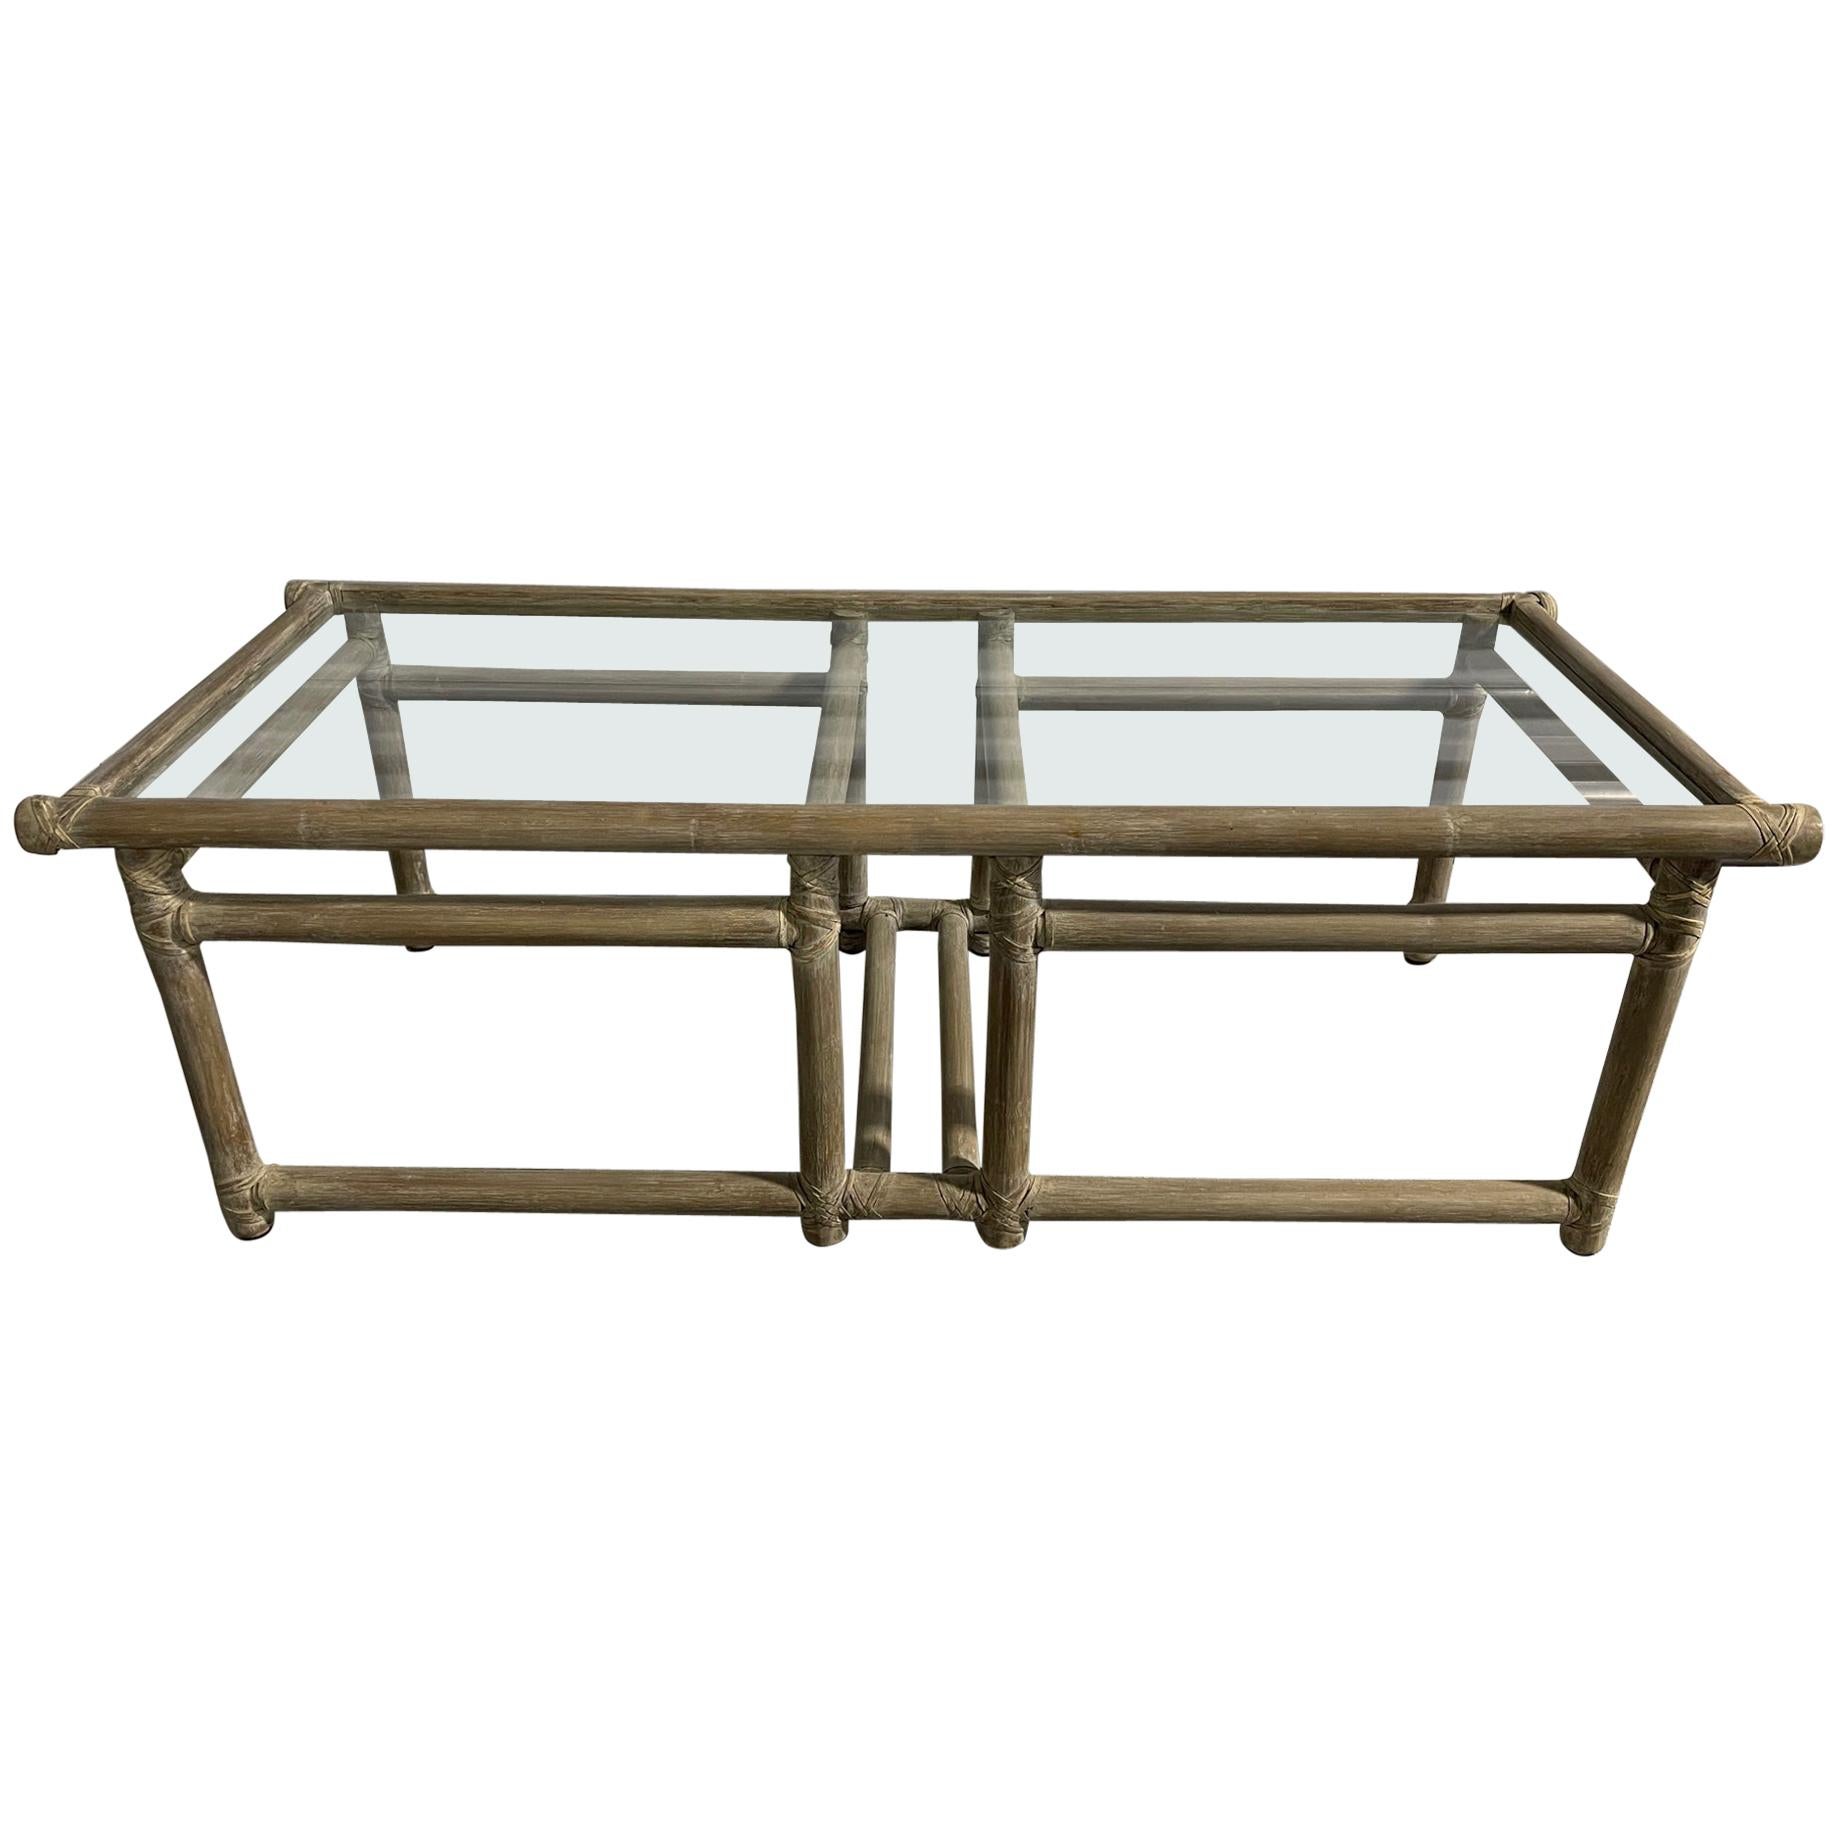 McGuire Midcentury Lacquered Bamboo Coffee Table with a Glass Top, 20th Century